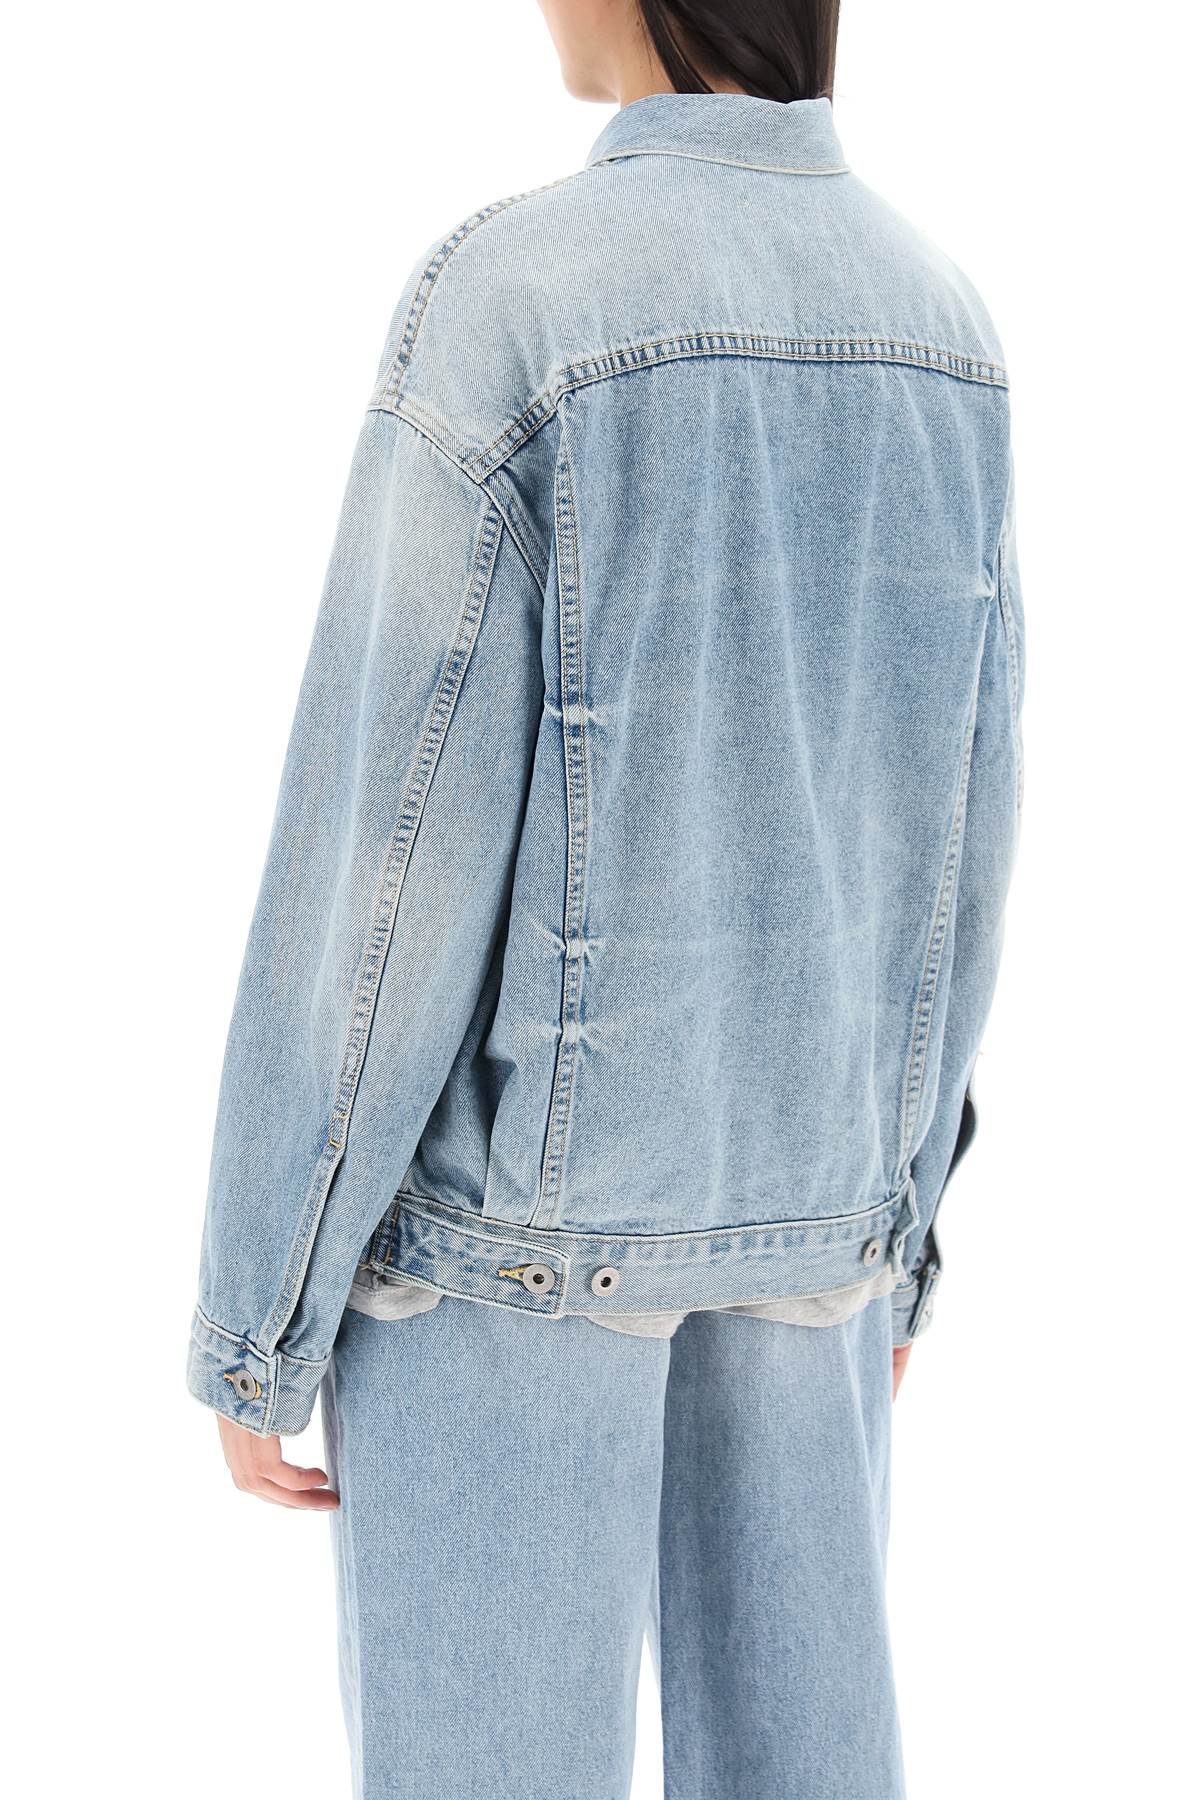 INTERIOR Oversized Denim Jacket with a Faded Wash for Women - SS24